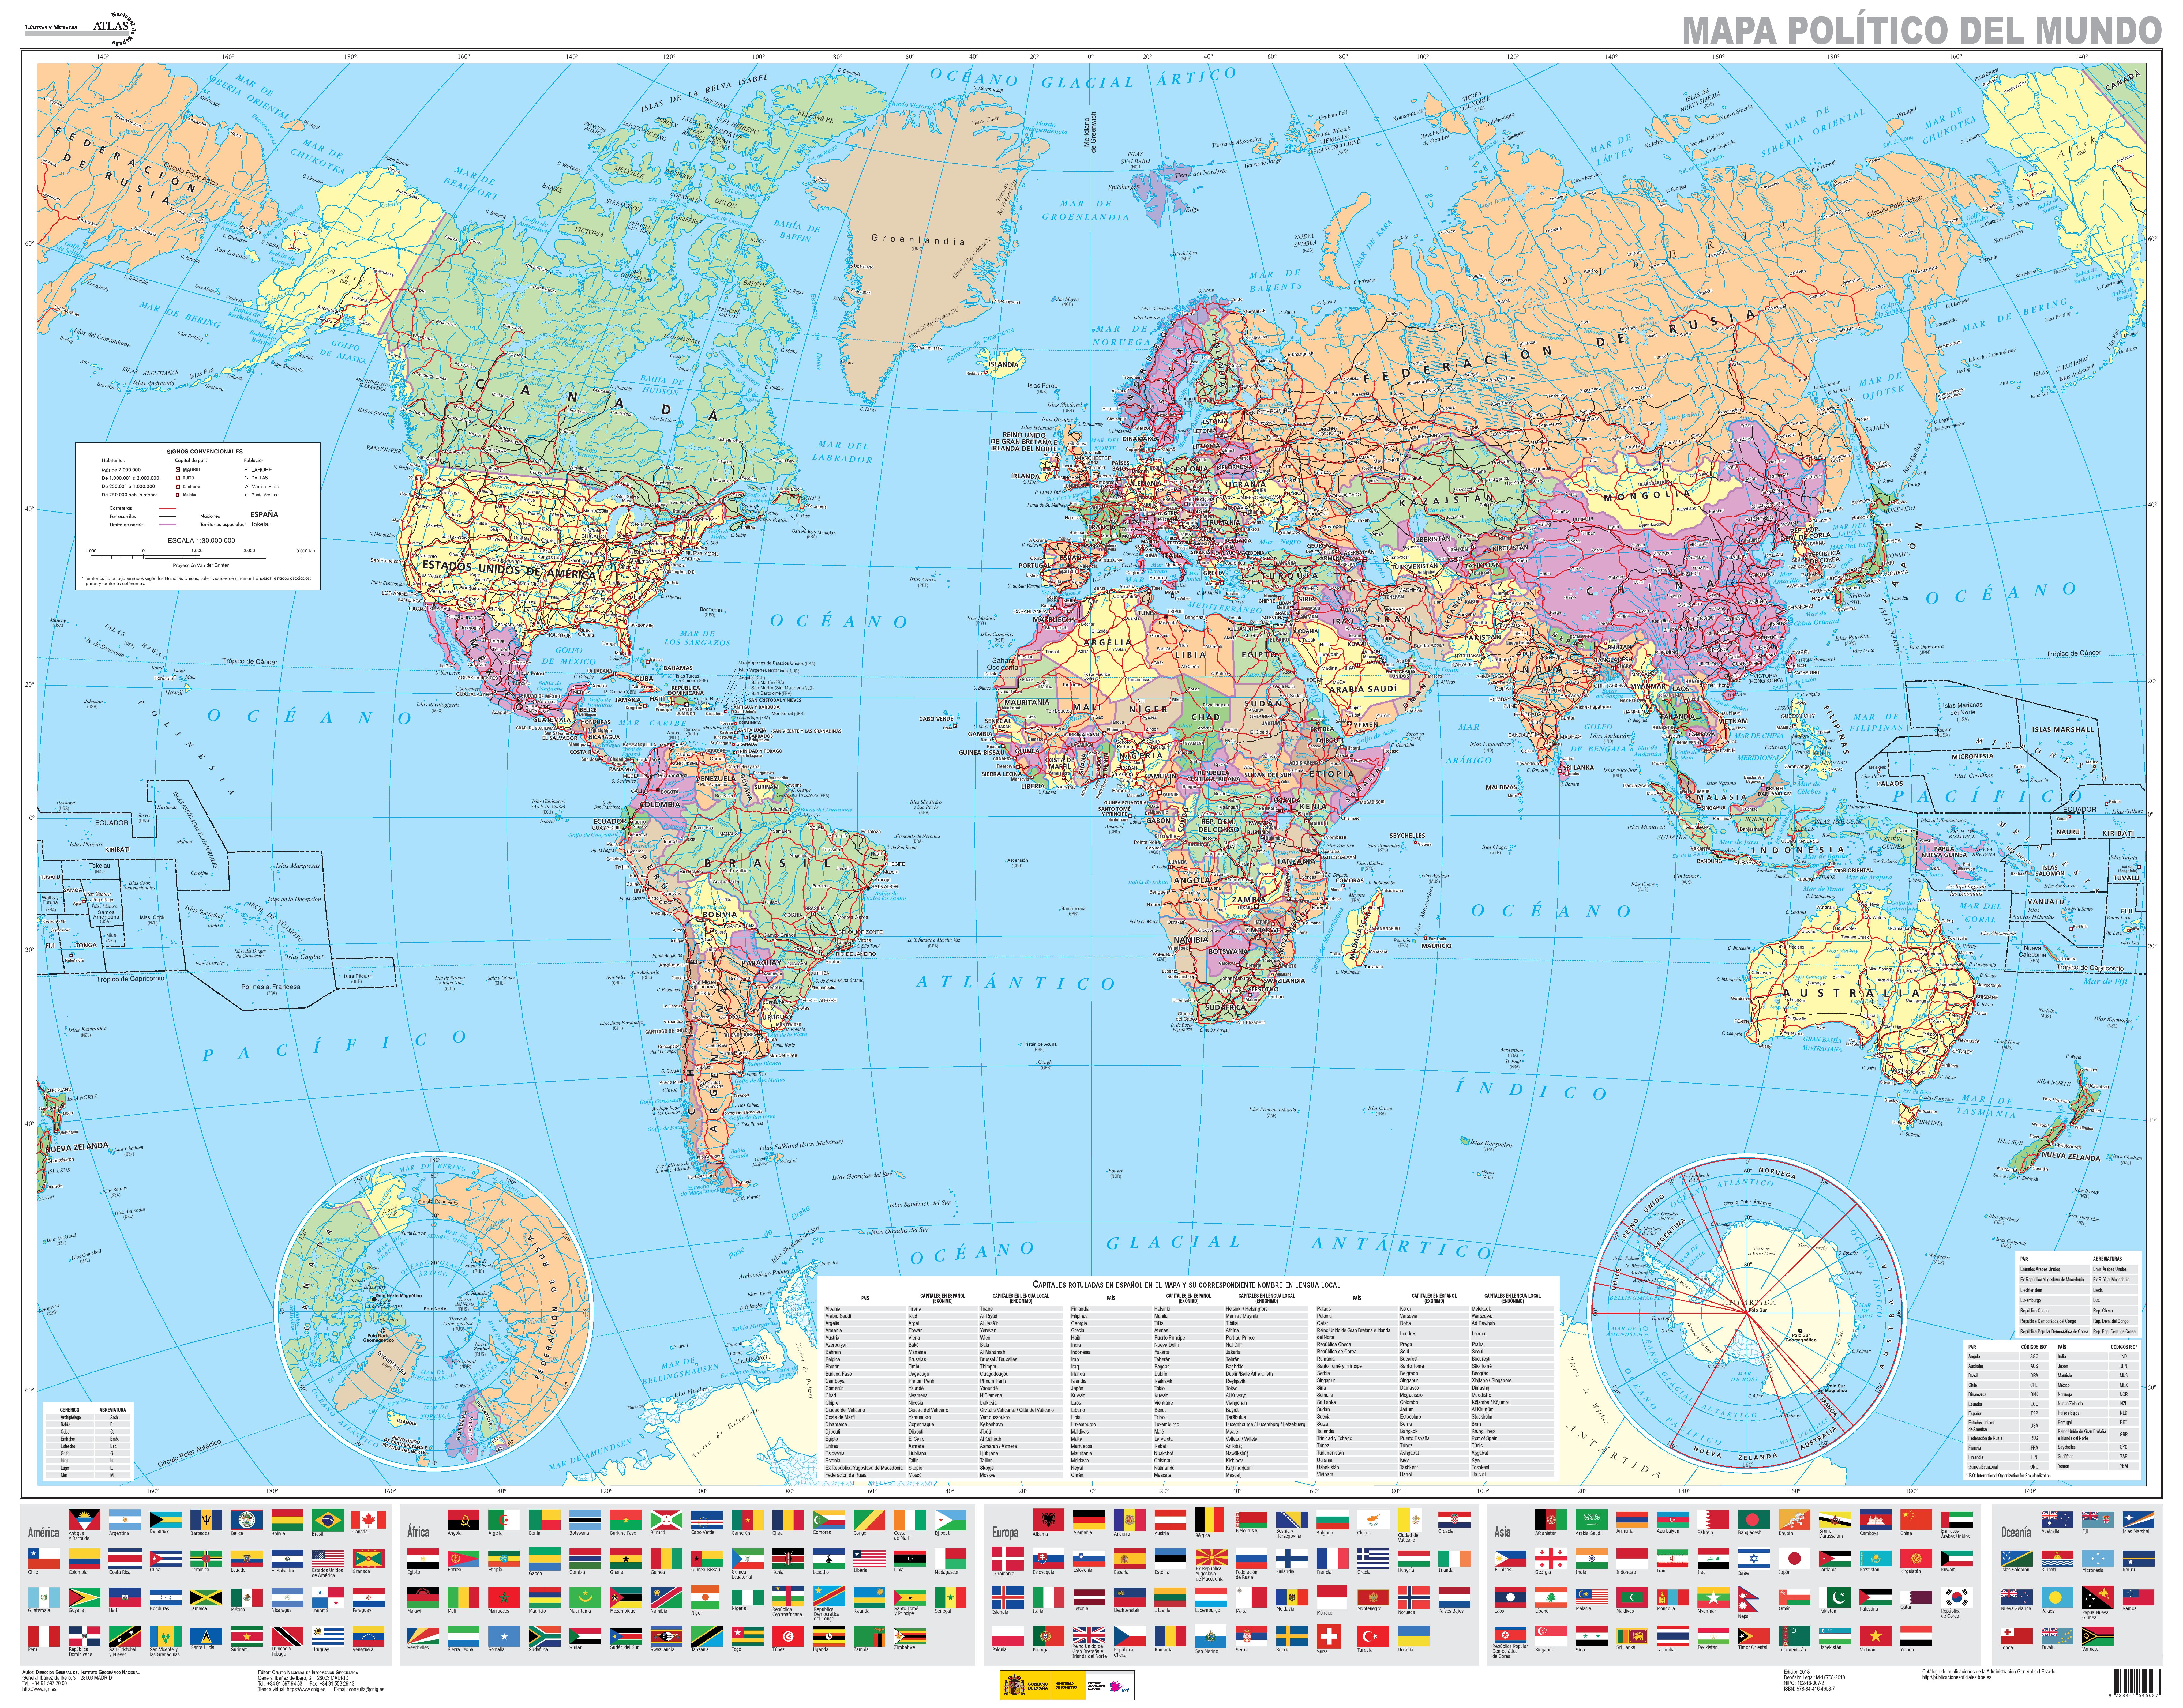 World political Map - Full size | Gifex